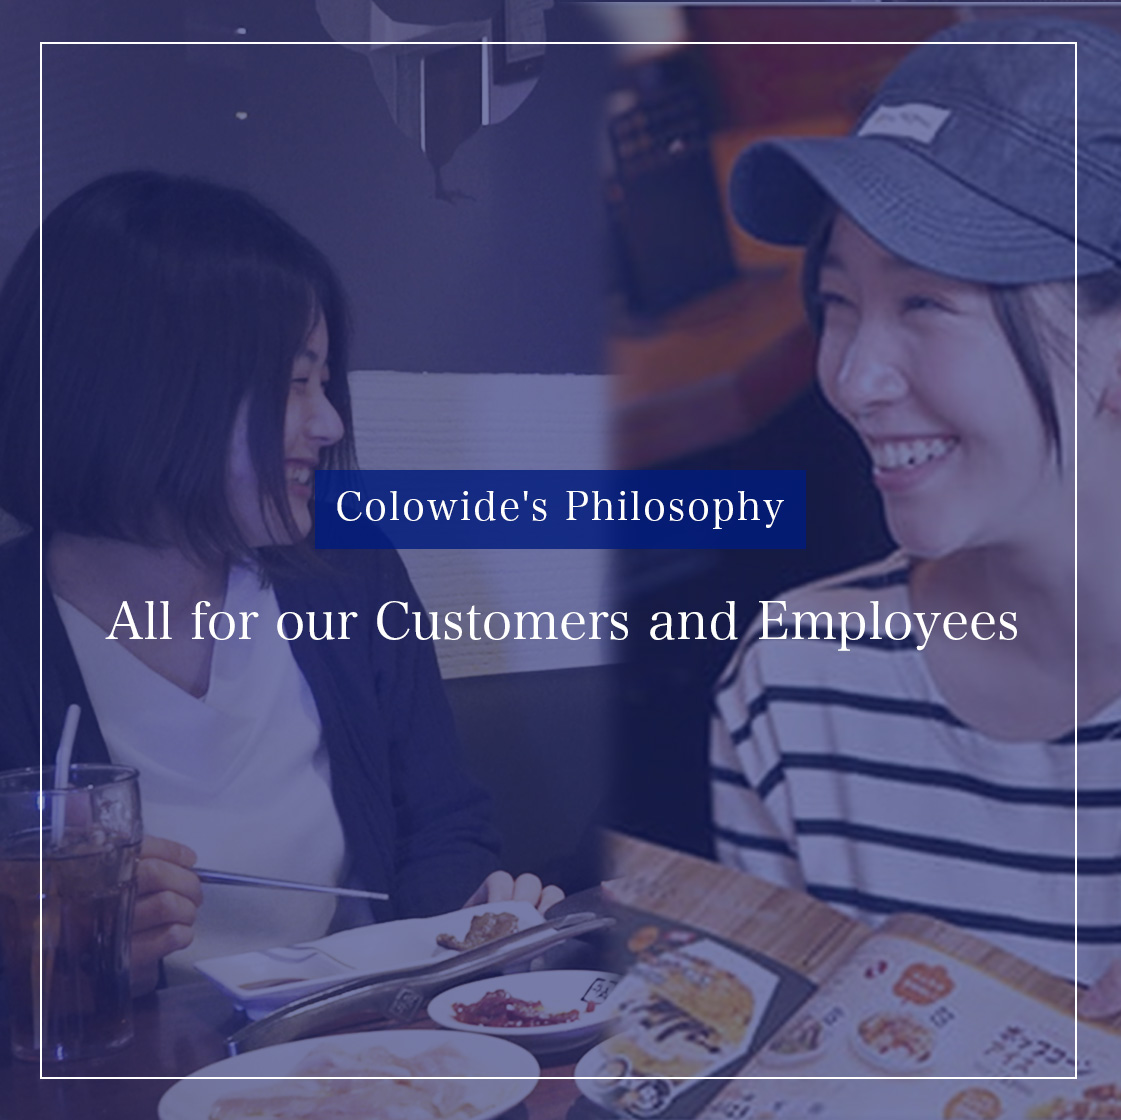 Colowide's Philosophy All for our Customers and Employees